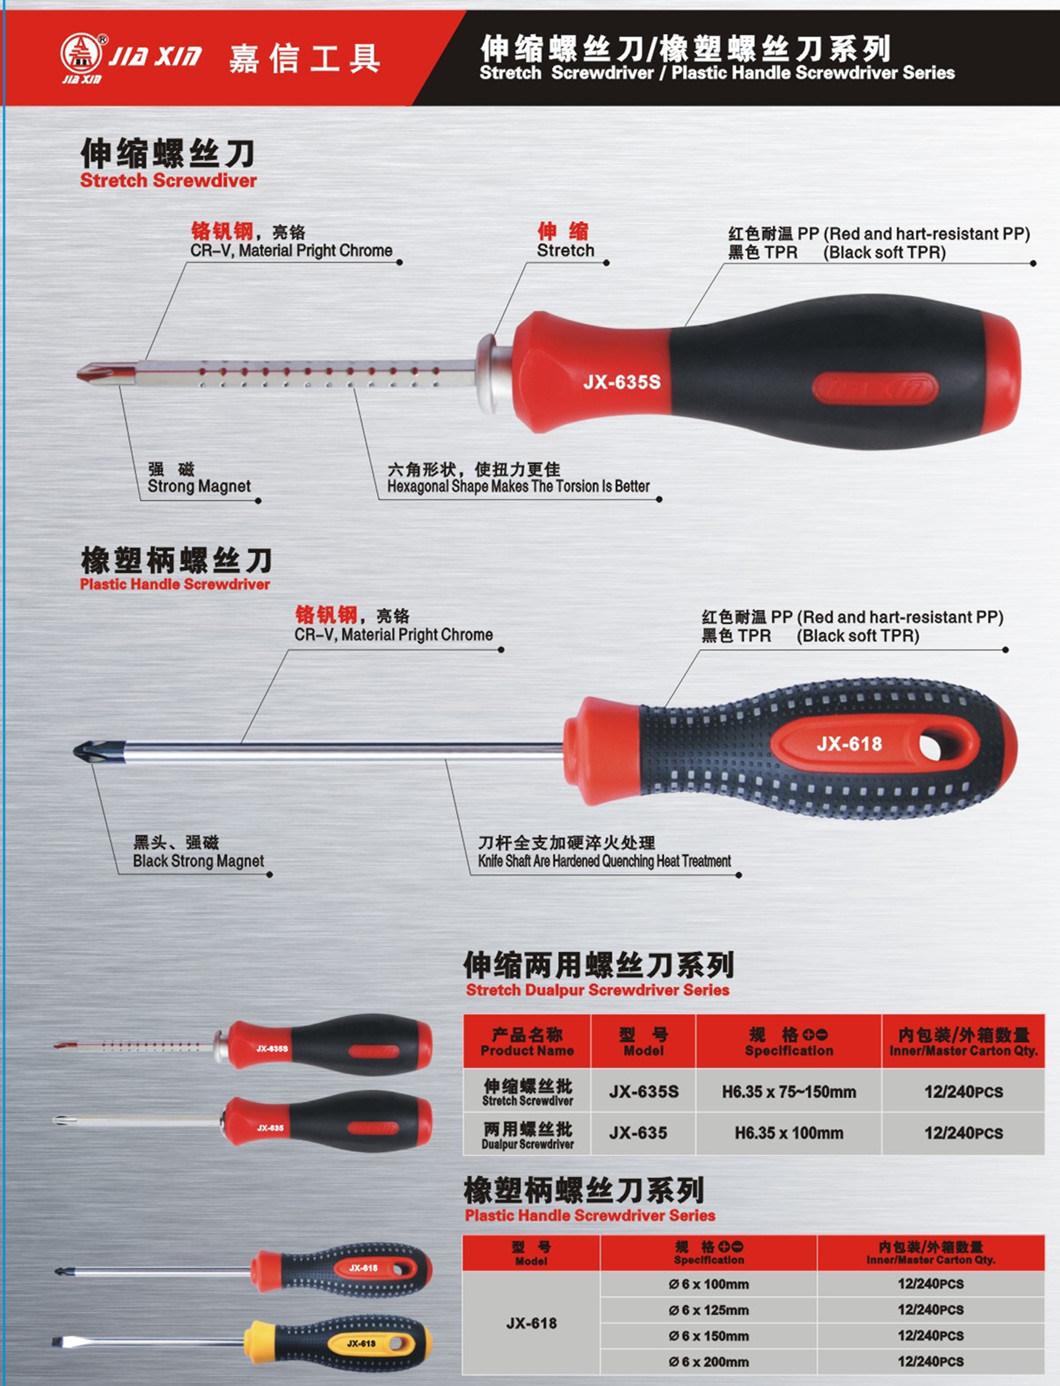 High Torque Screwdriver with Skid Resistant Handle for Increased Torque Holes